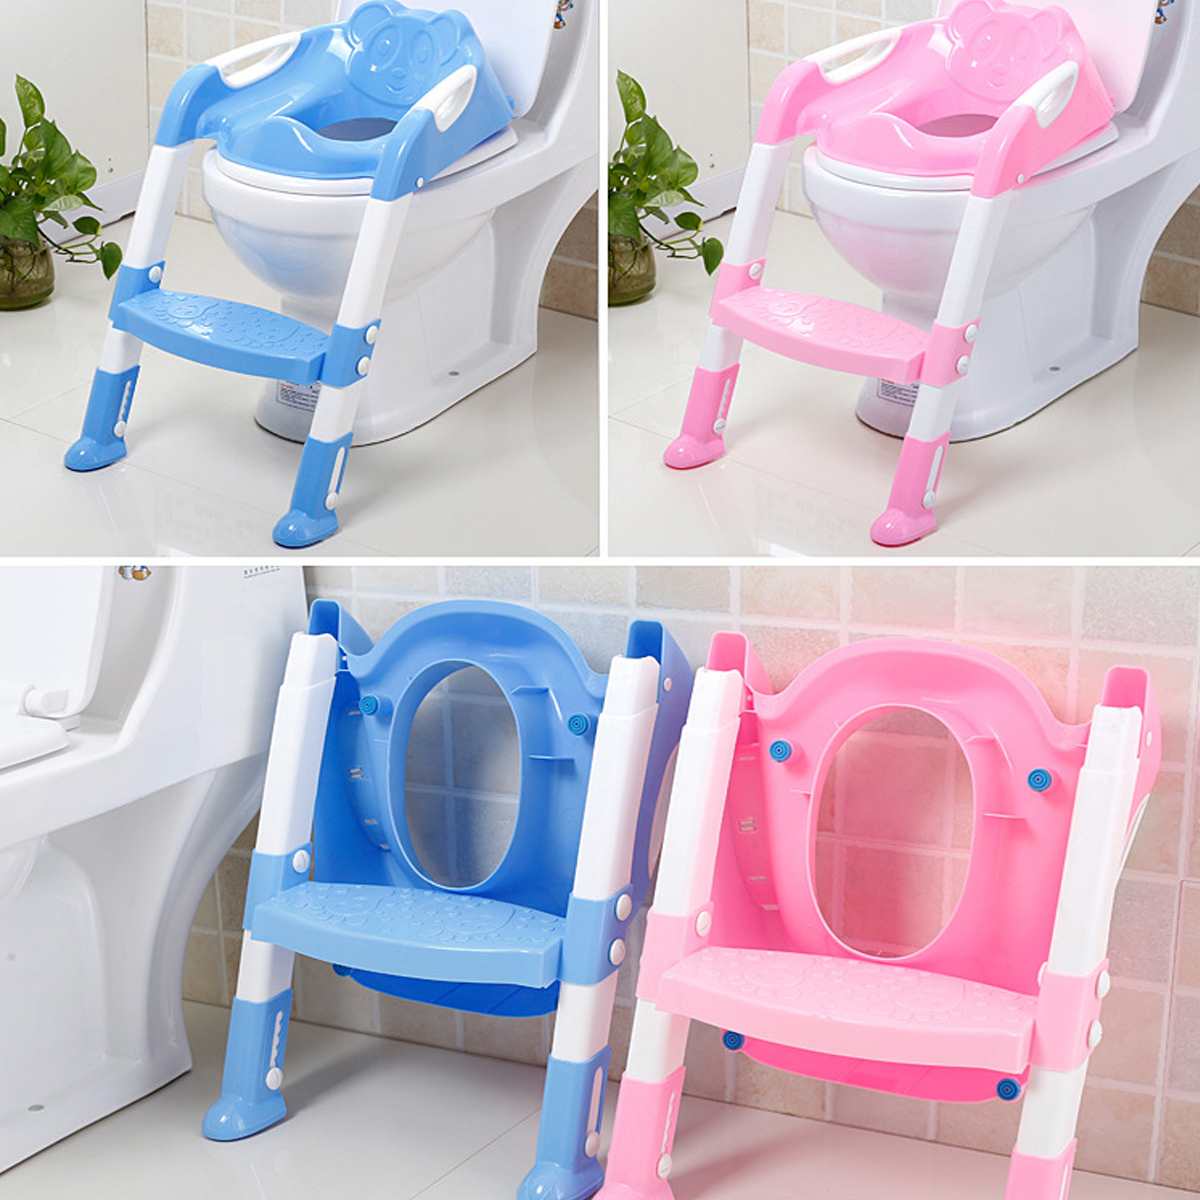 Folding Infant Baby Potty Kids Toilet Training Seat with Adjustable Ladder Portable Urinal Potty Training Seats for Children